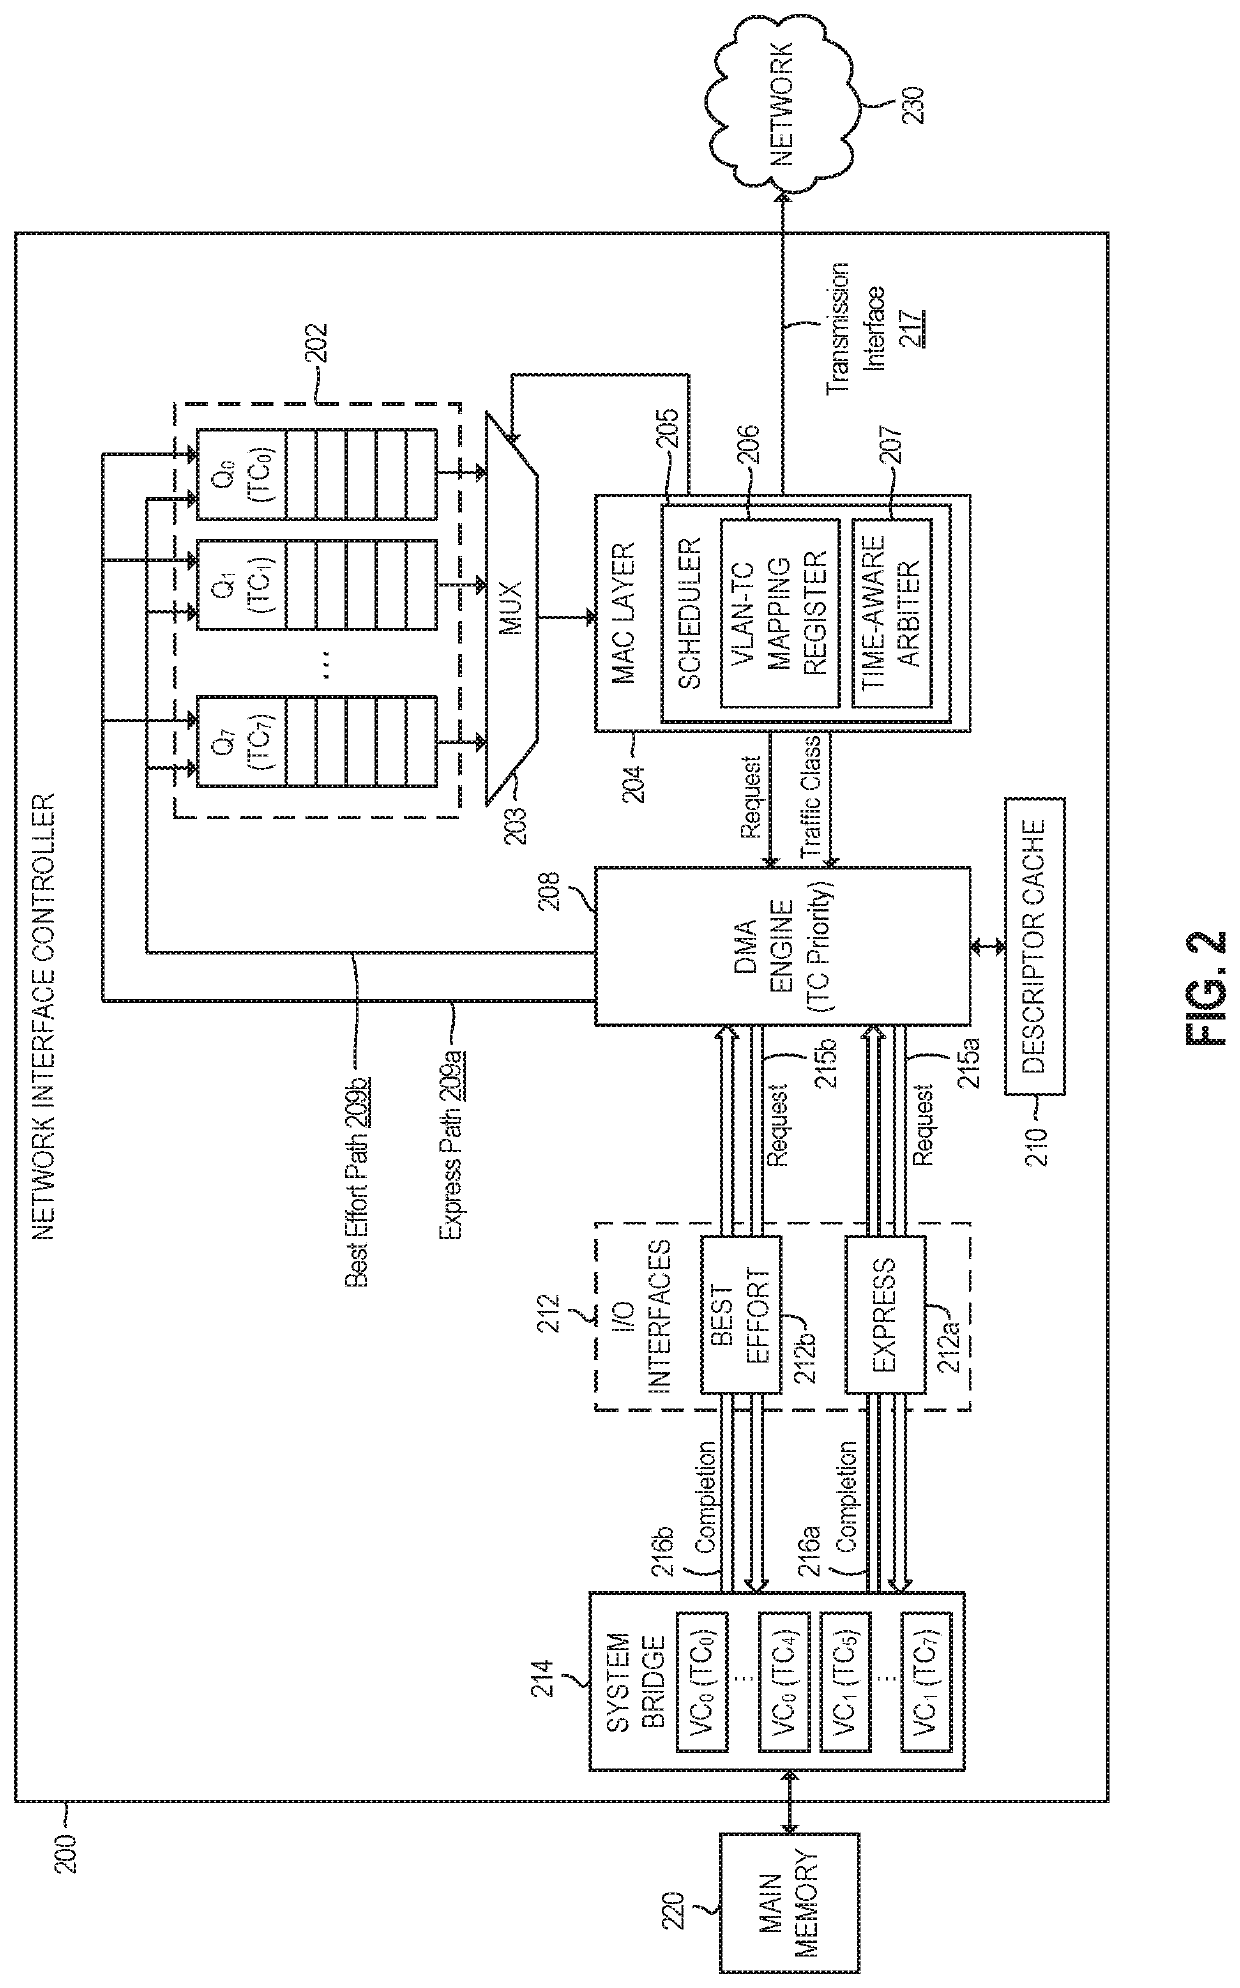 Deterministic packet scheduling and DMA for time sensitive networking